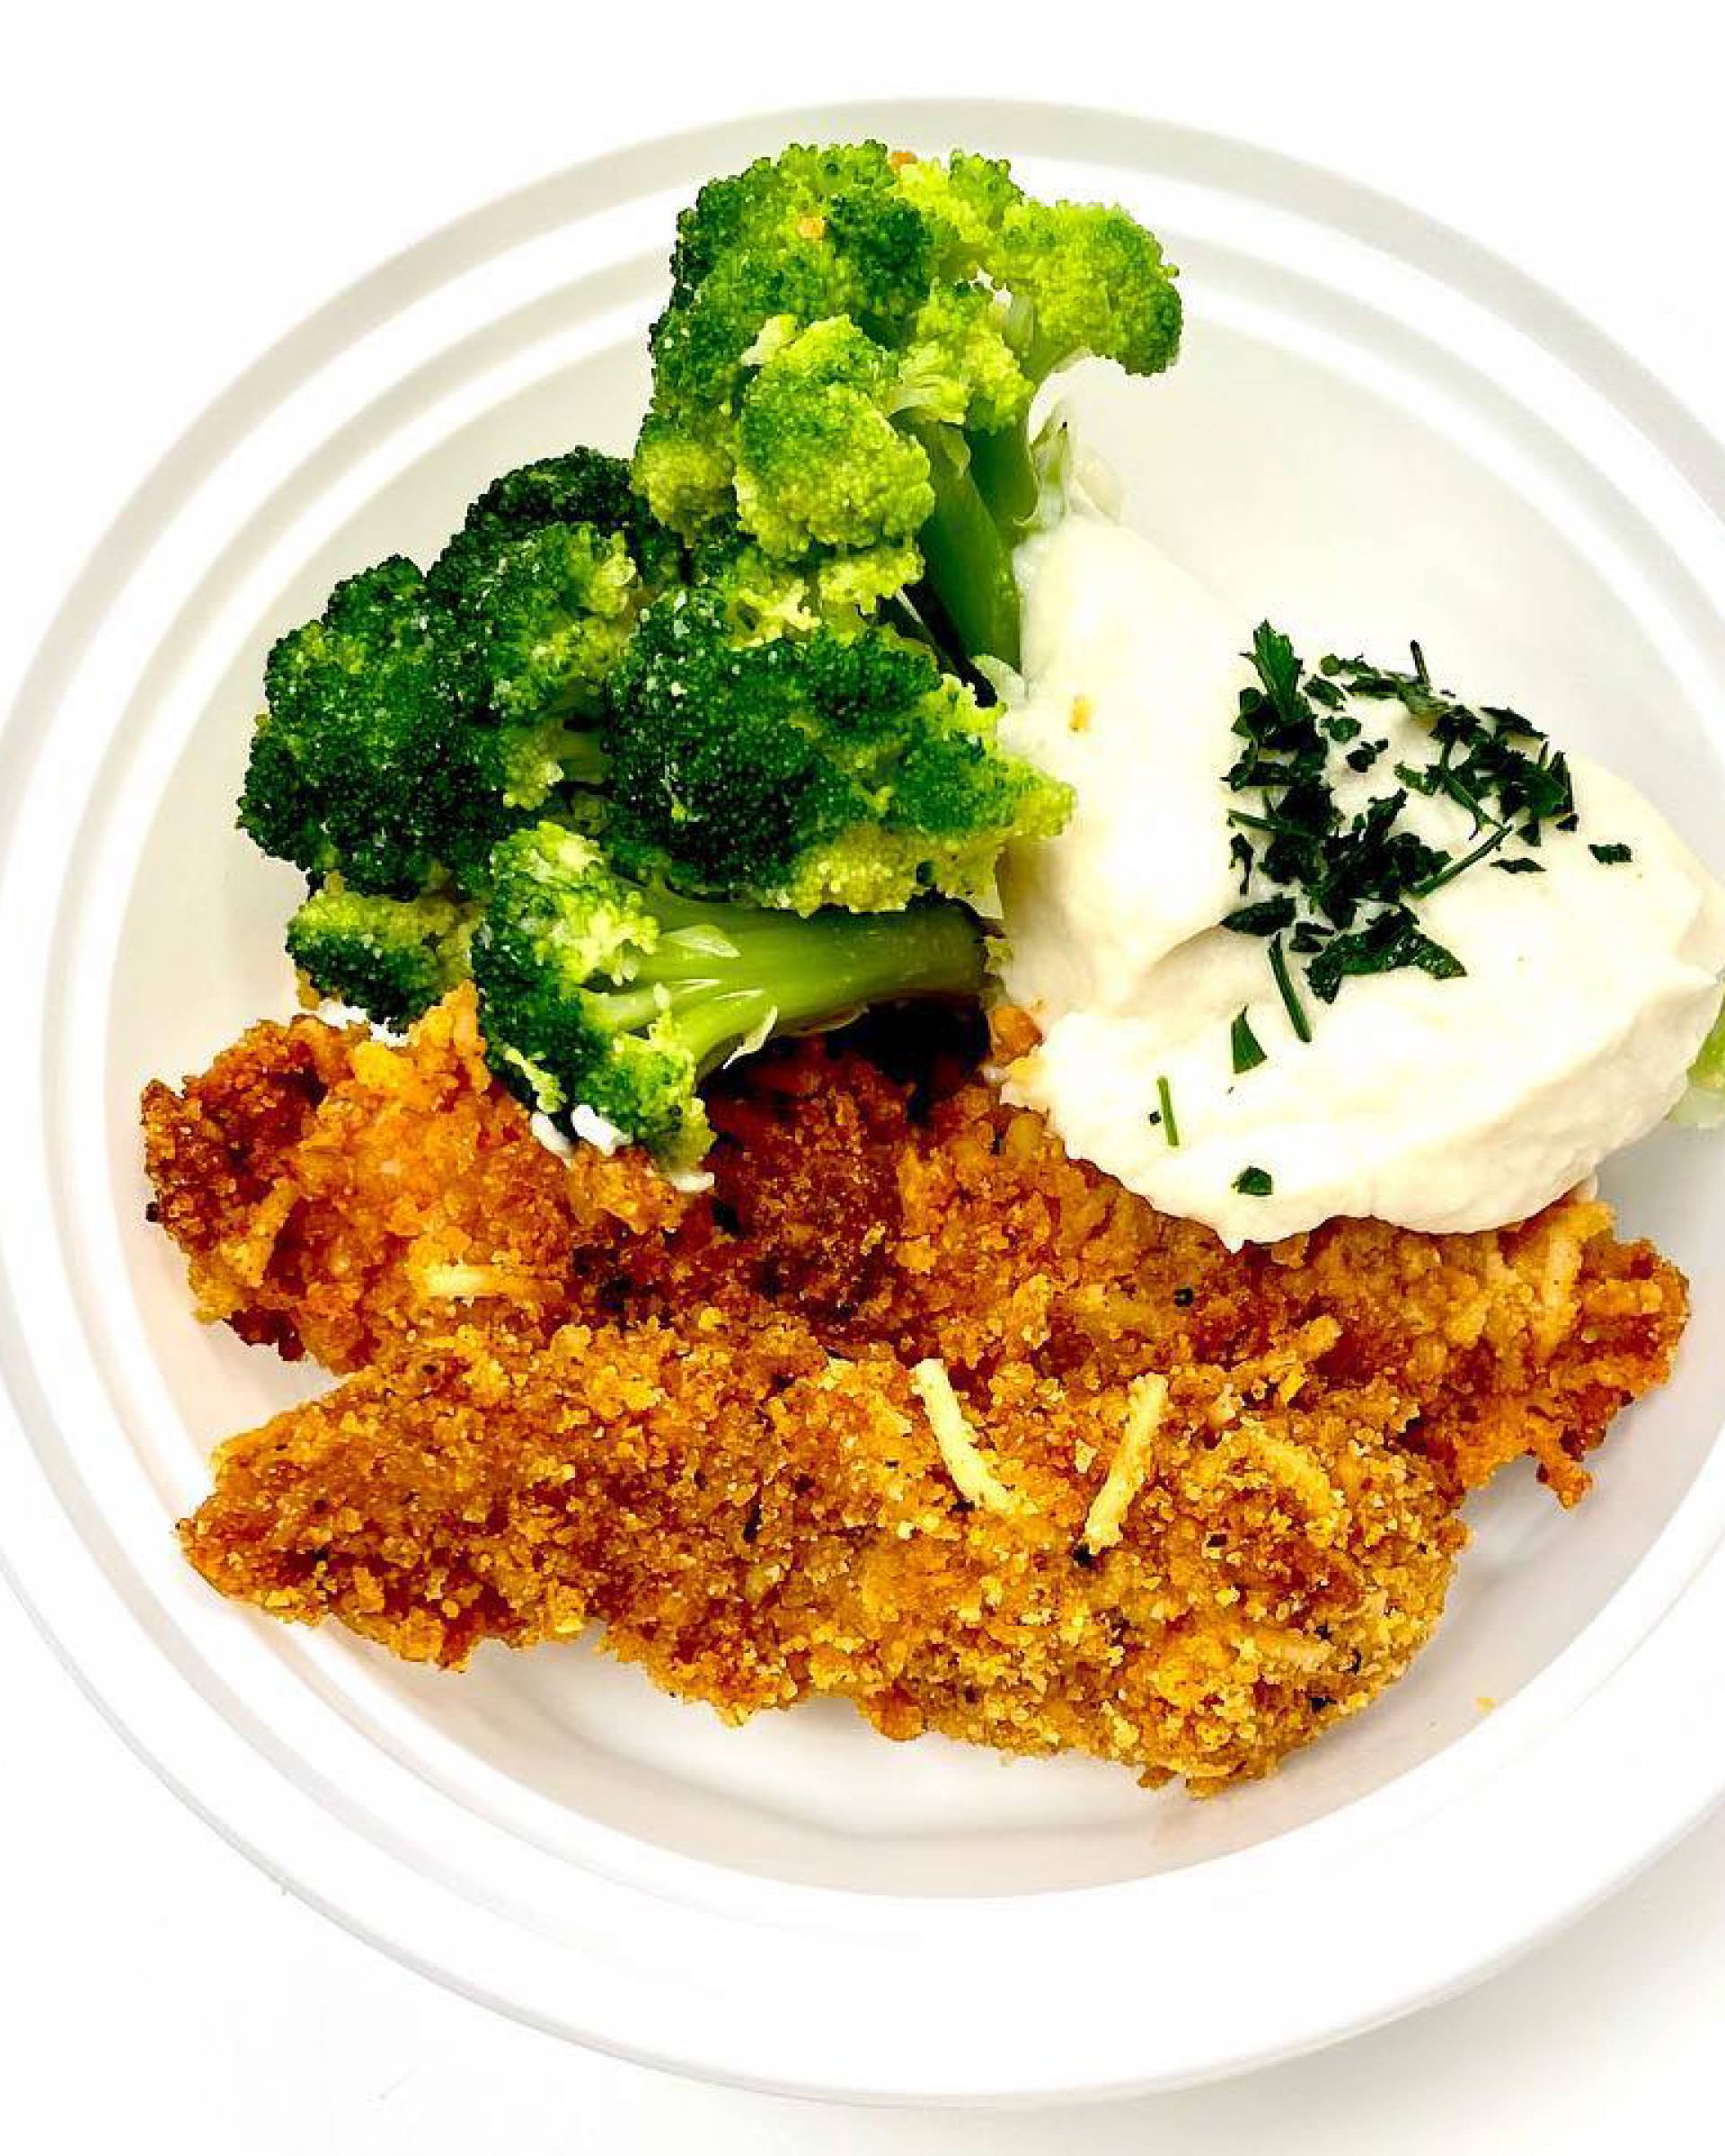 Chicken Tenders with Parsnip Mashed Potatoes and Broccoli Crowns - Keto